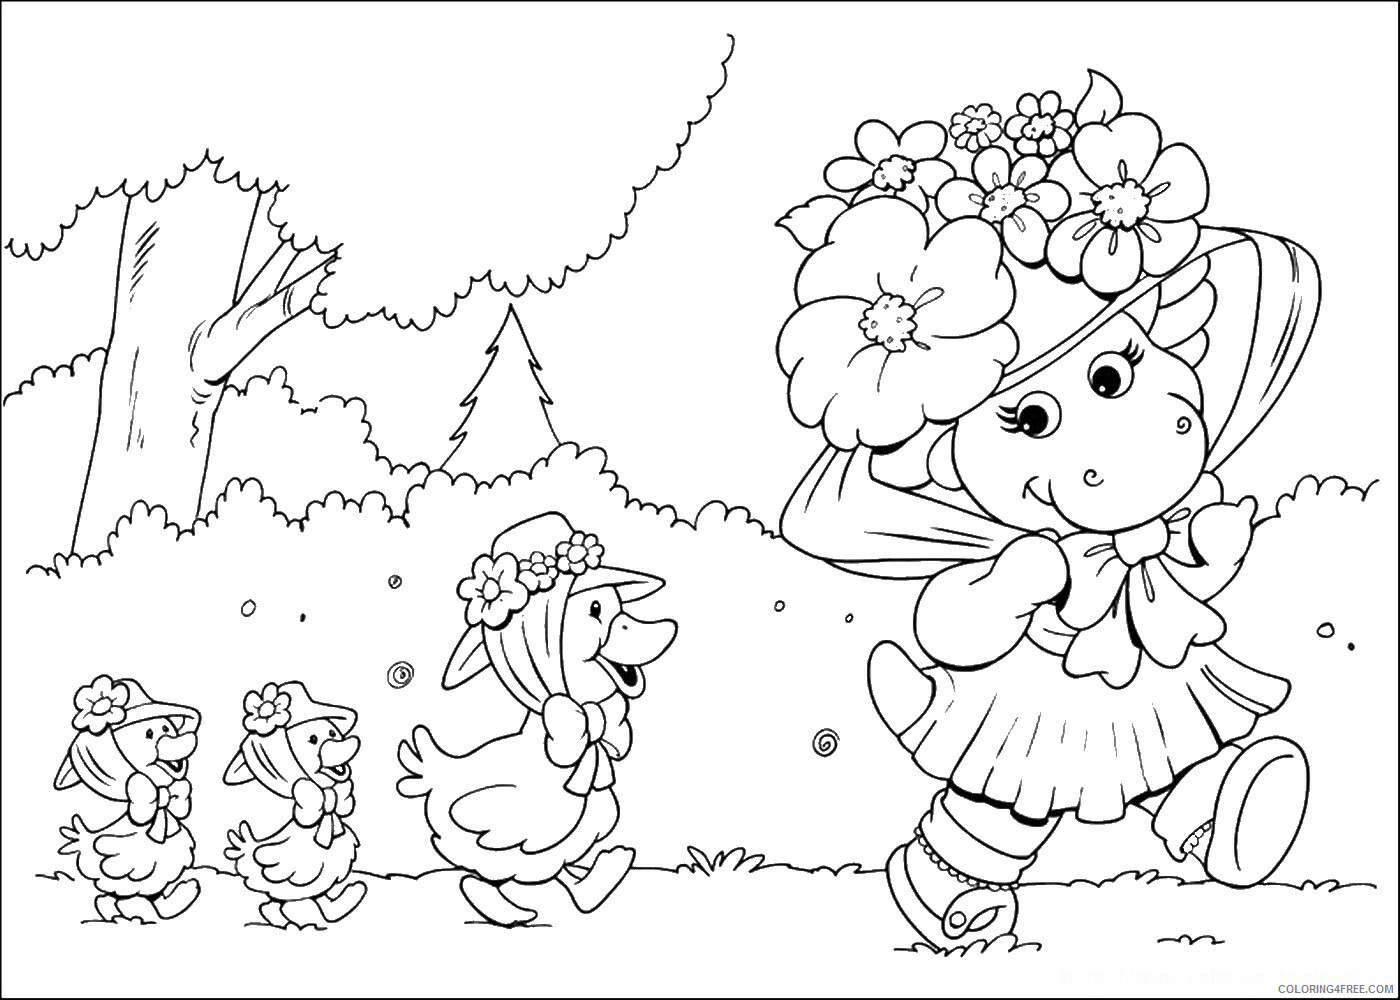 Barney and Friends Coloring Pages TV Film barney_cl_1035 Printable 2020 00608 Coloring4free